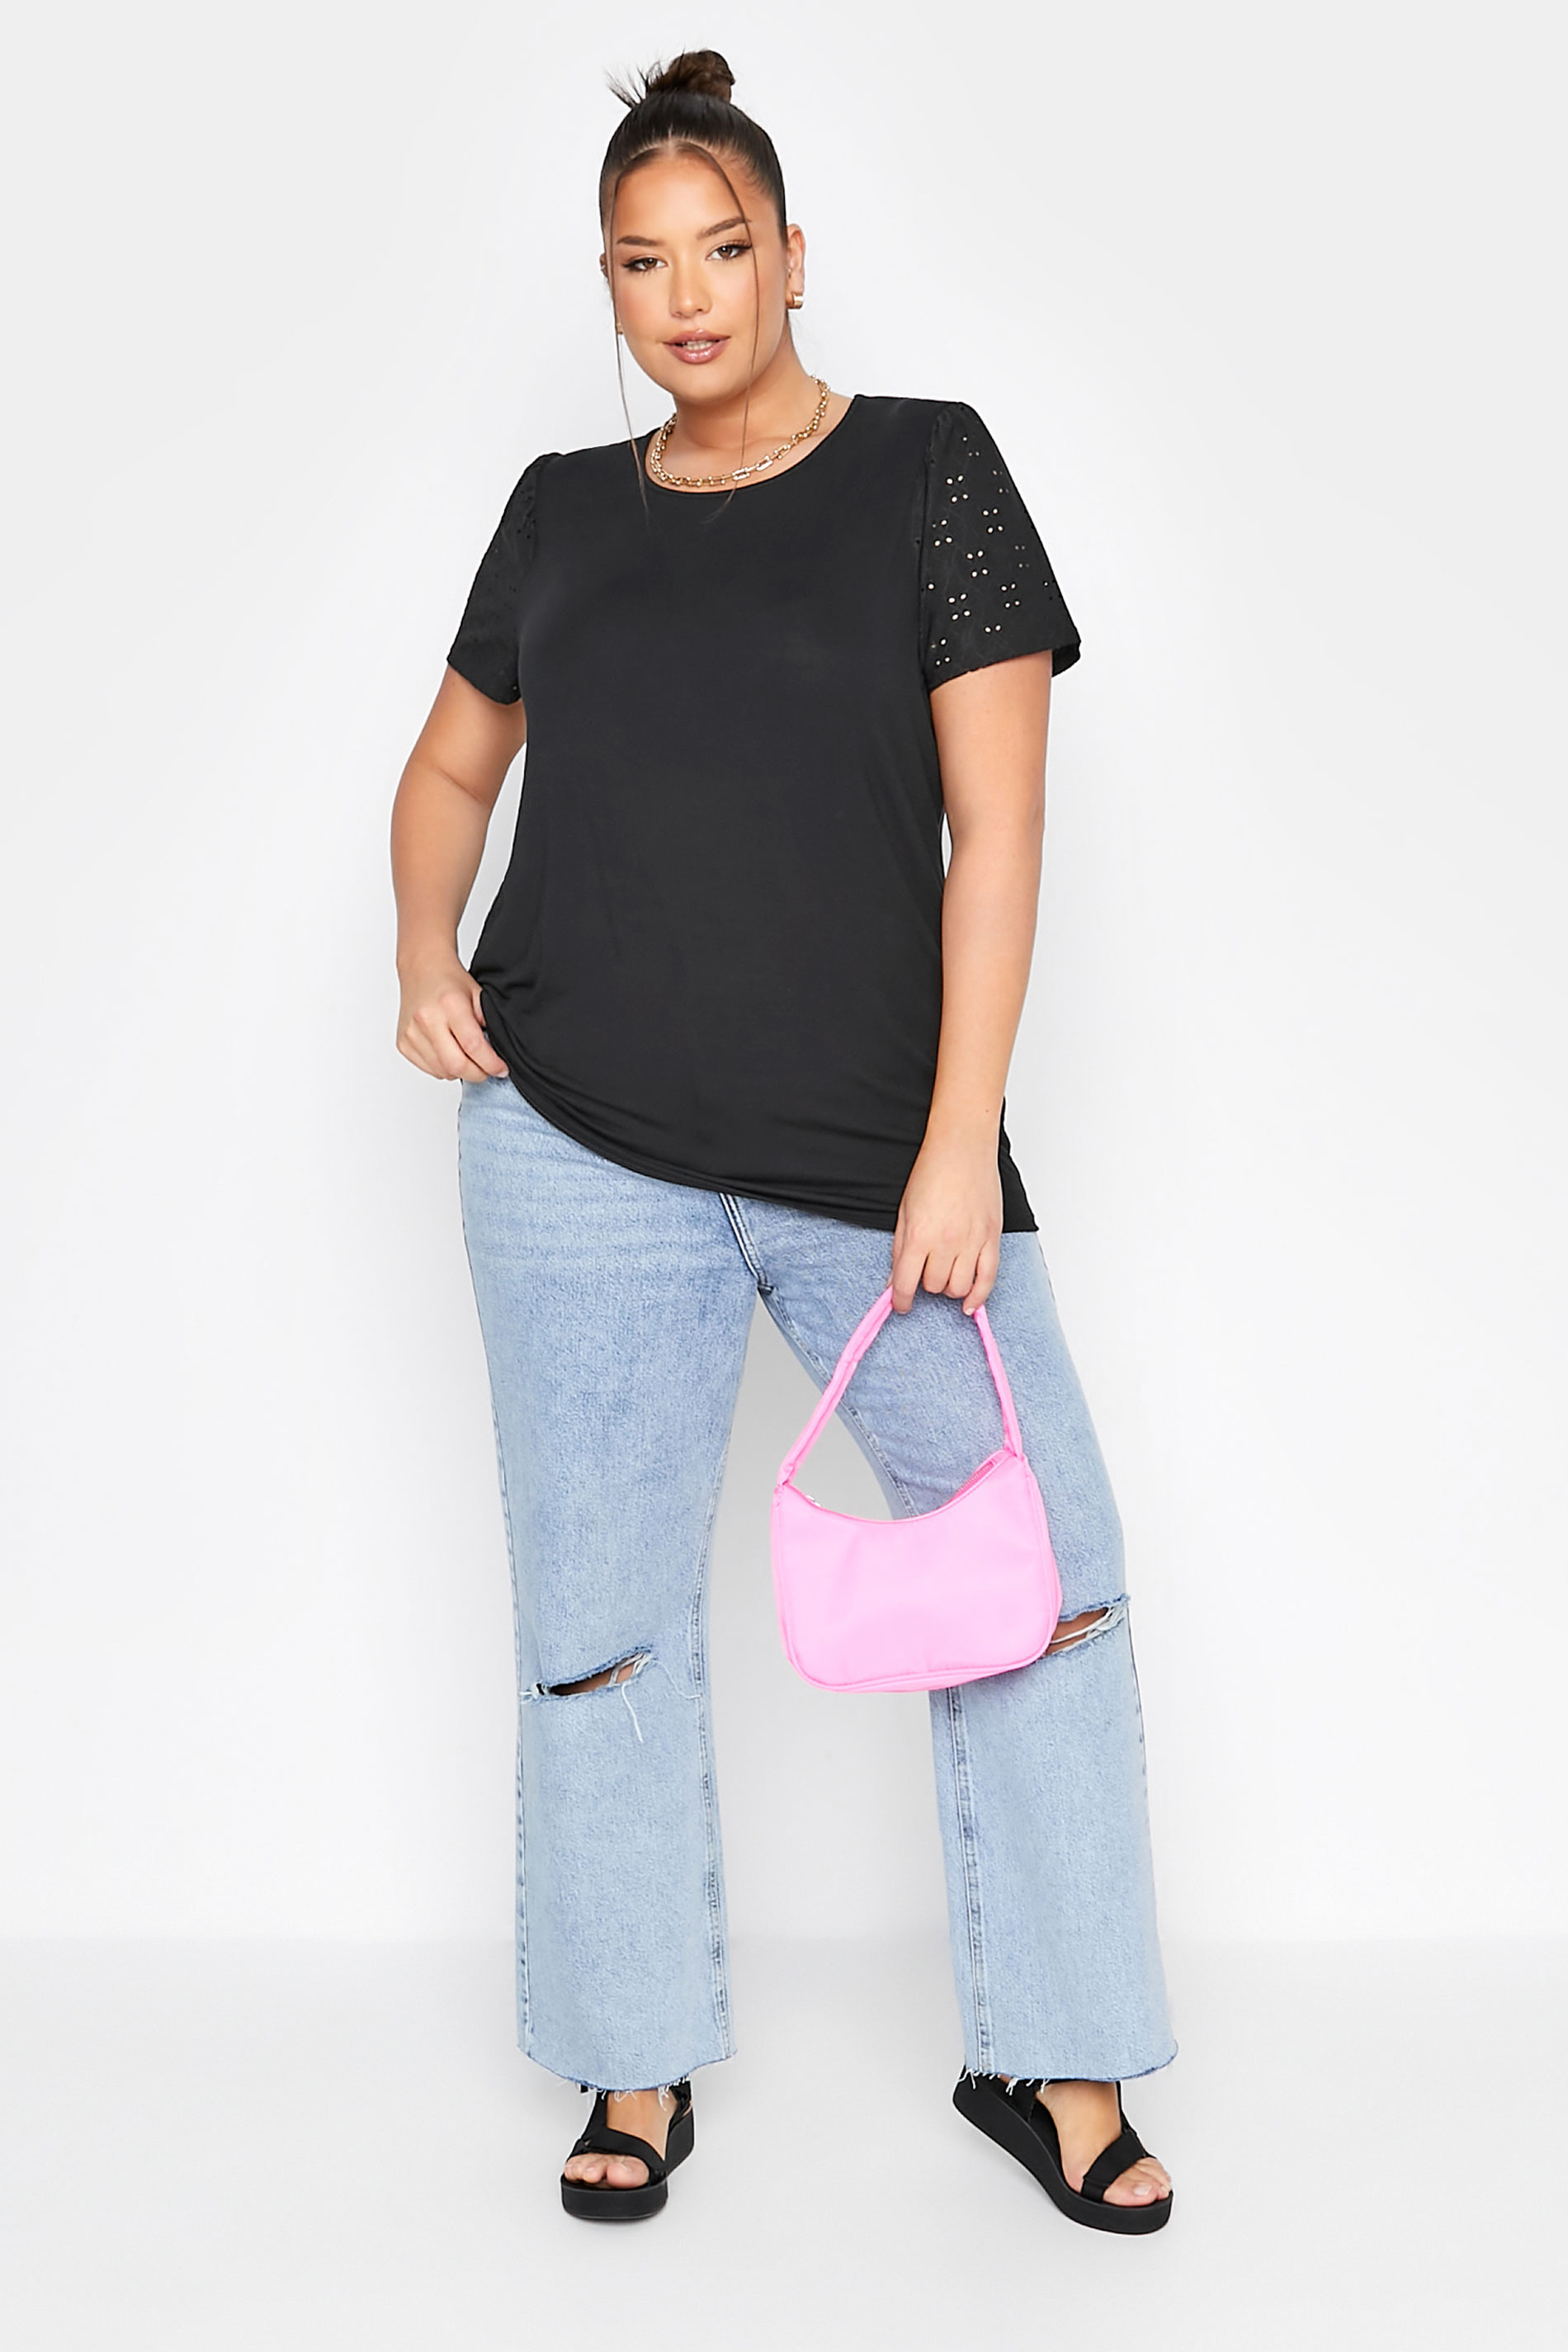 Grande taille  Tops Grande taille  T-Shirts | LIMITED COLLECTION - T-Shirt Noir Manches Broderie Anglaise - SW84134